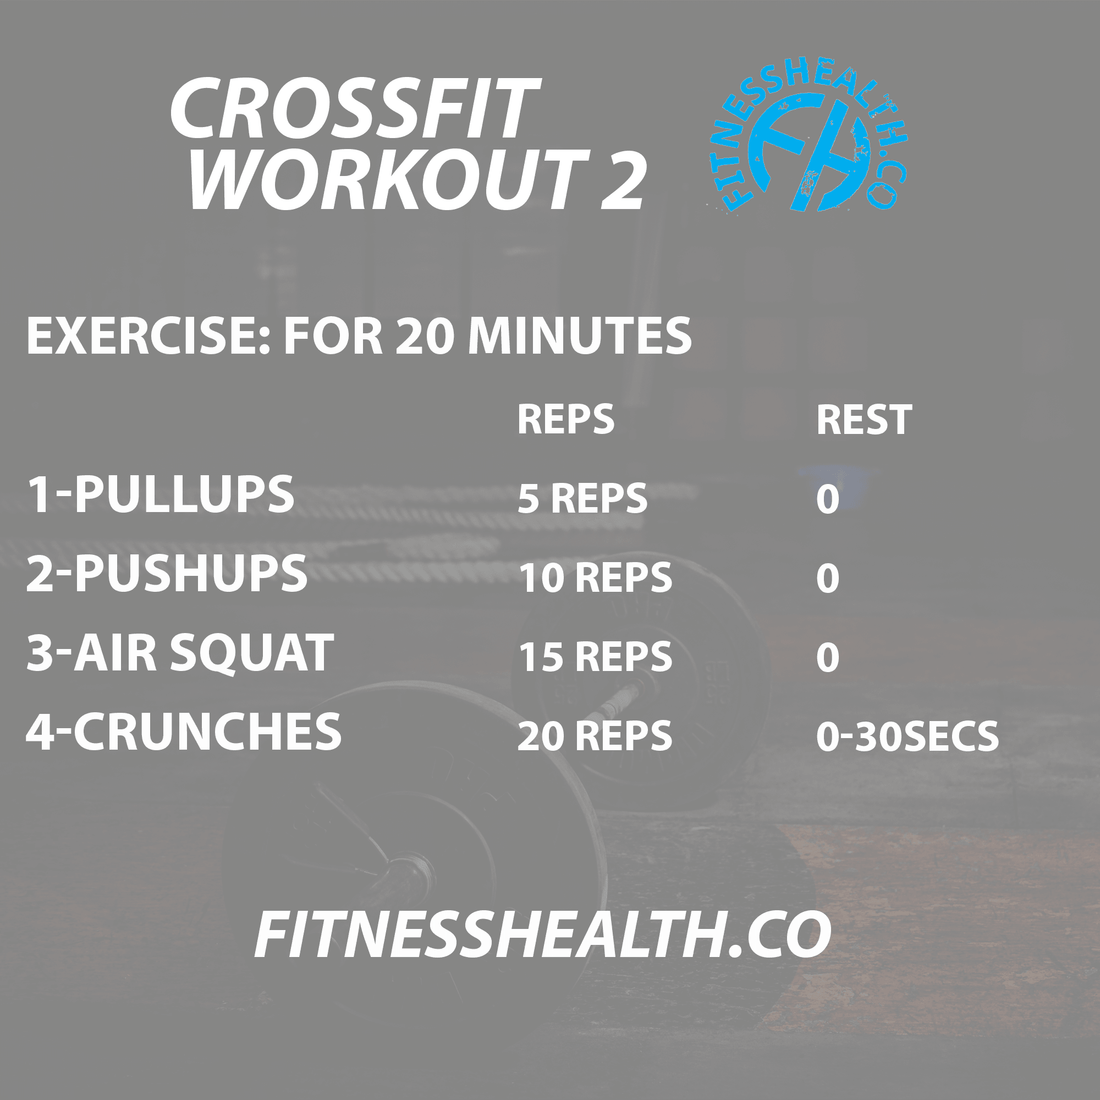 Crossfit workout 2 no equipment - Fitness Health 